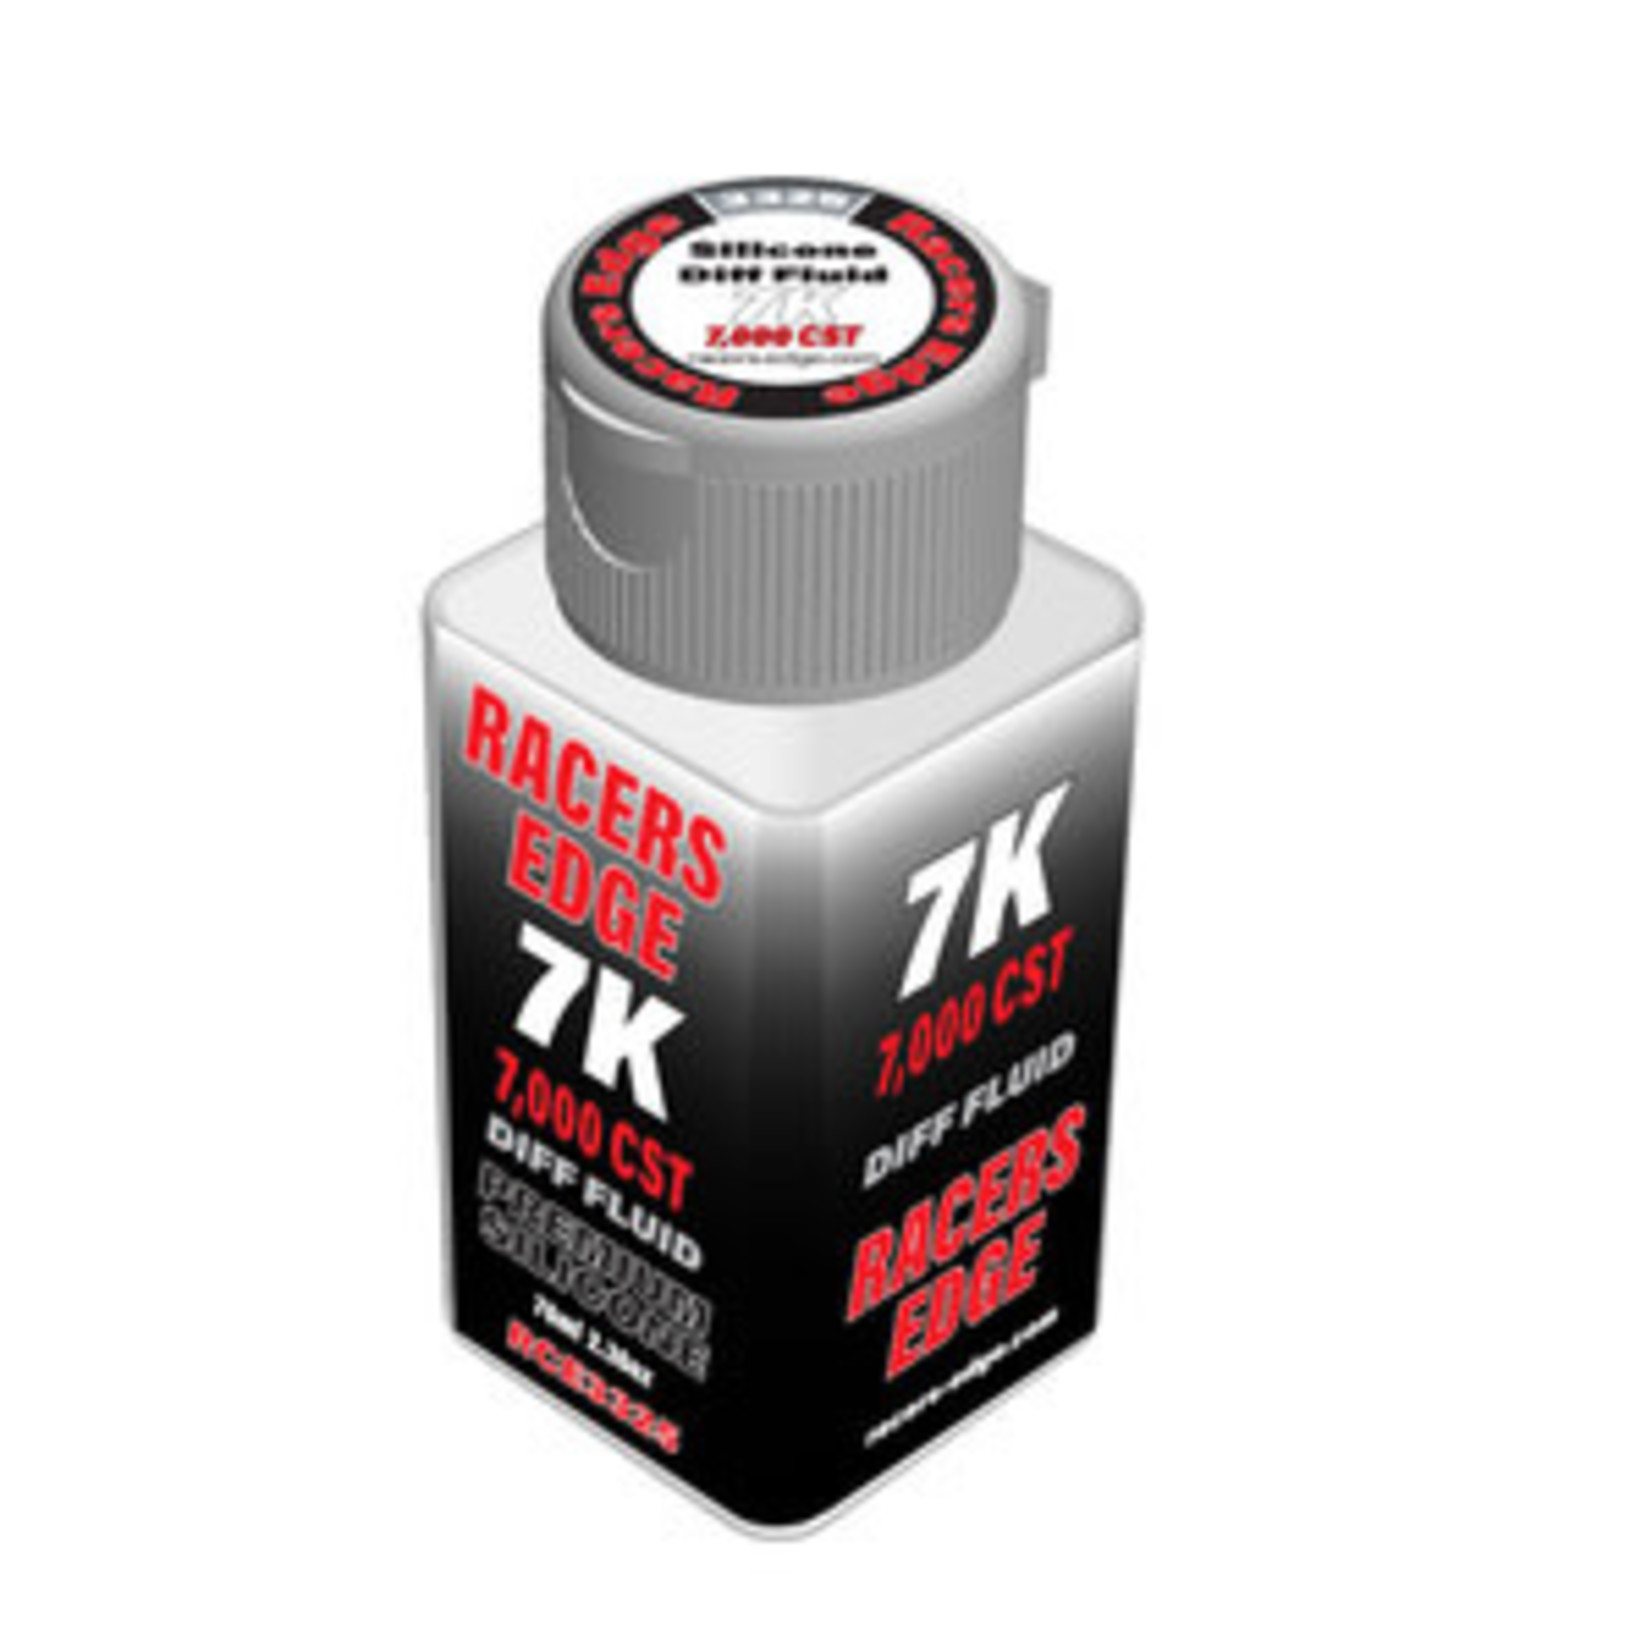 RACERS EDGE 7,000cSt 70ml 2.36oz Pure Silicone Diff Fluid